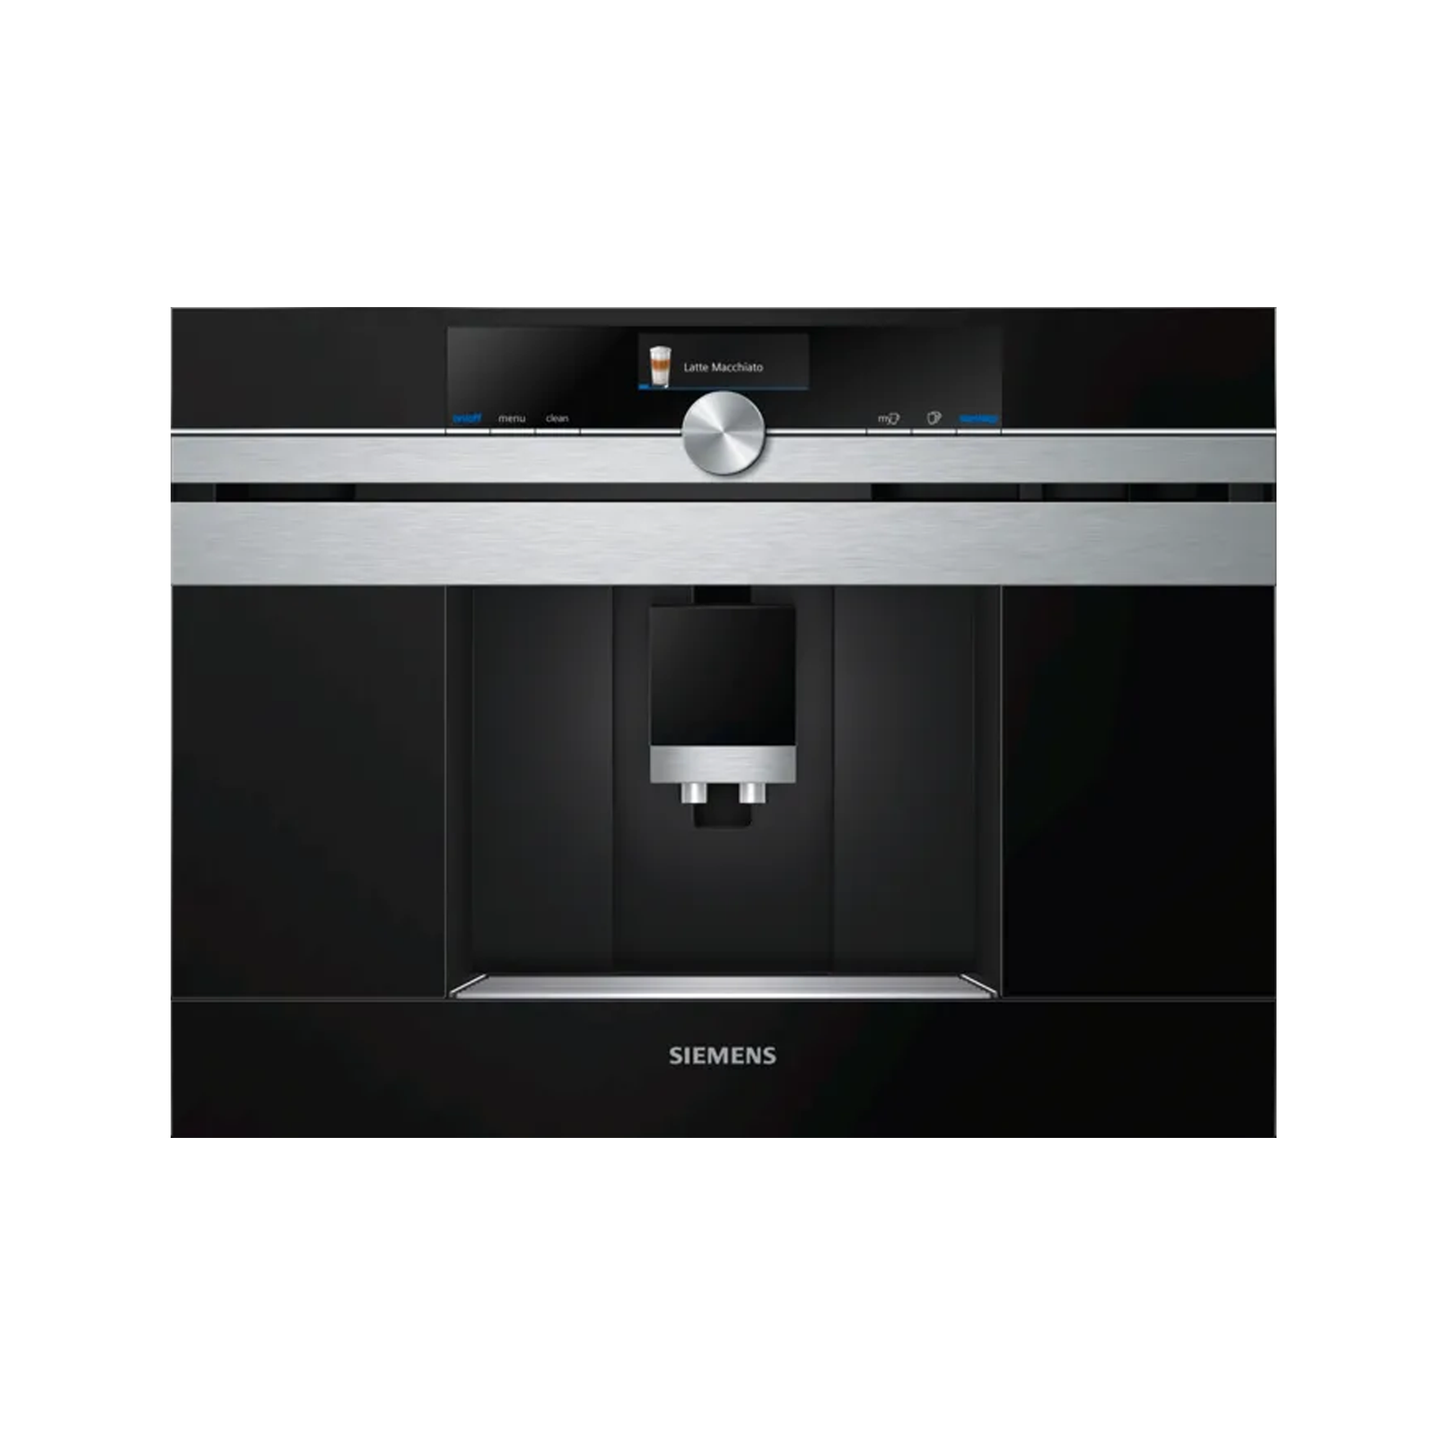 SIEMENS CT636LES1 600mm Fully Automatic Built-in Coffee Machine with Water Filter  | Made in Europe |